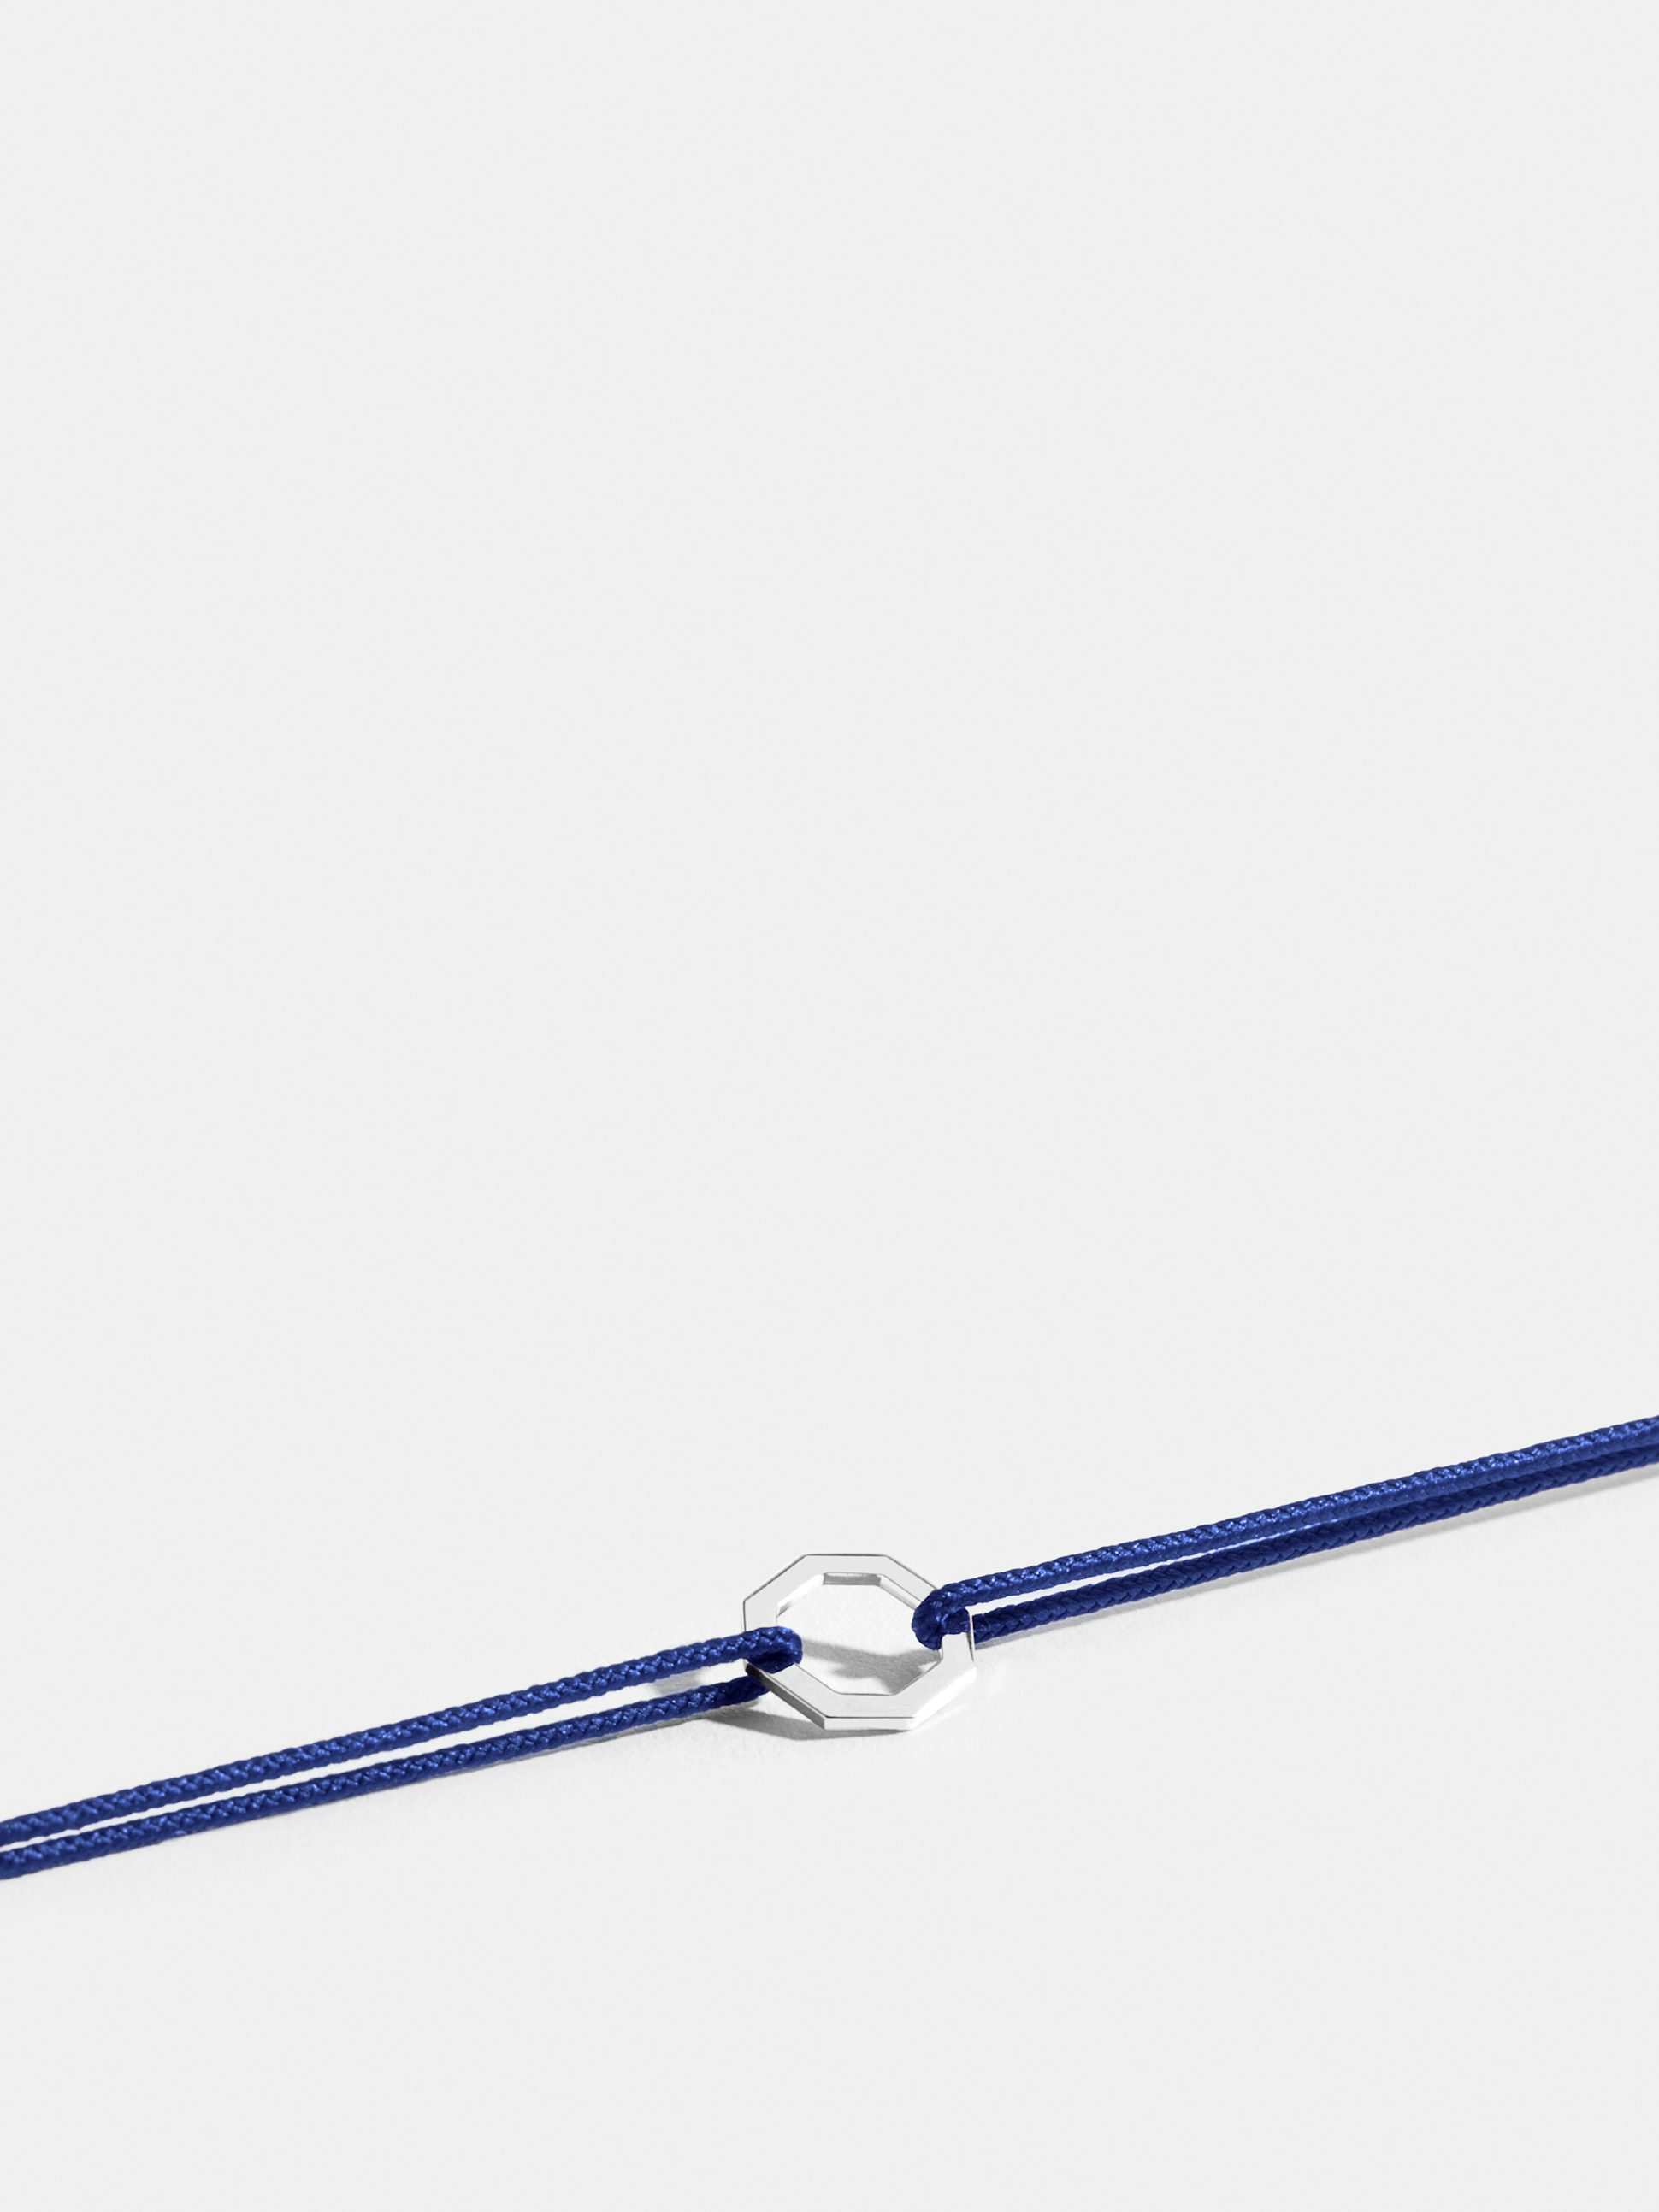 Octogone motif in 18k Fairmined ethical white gold, on a klein blue cord. 